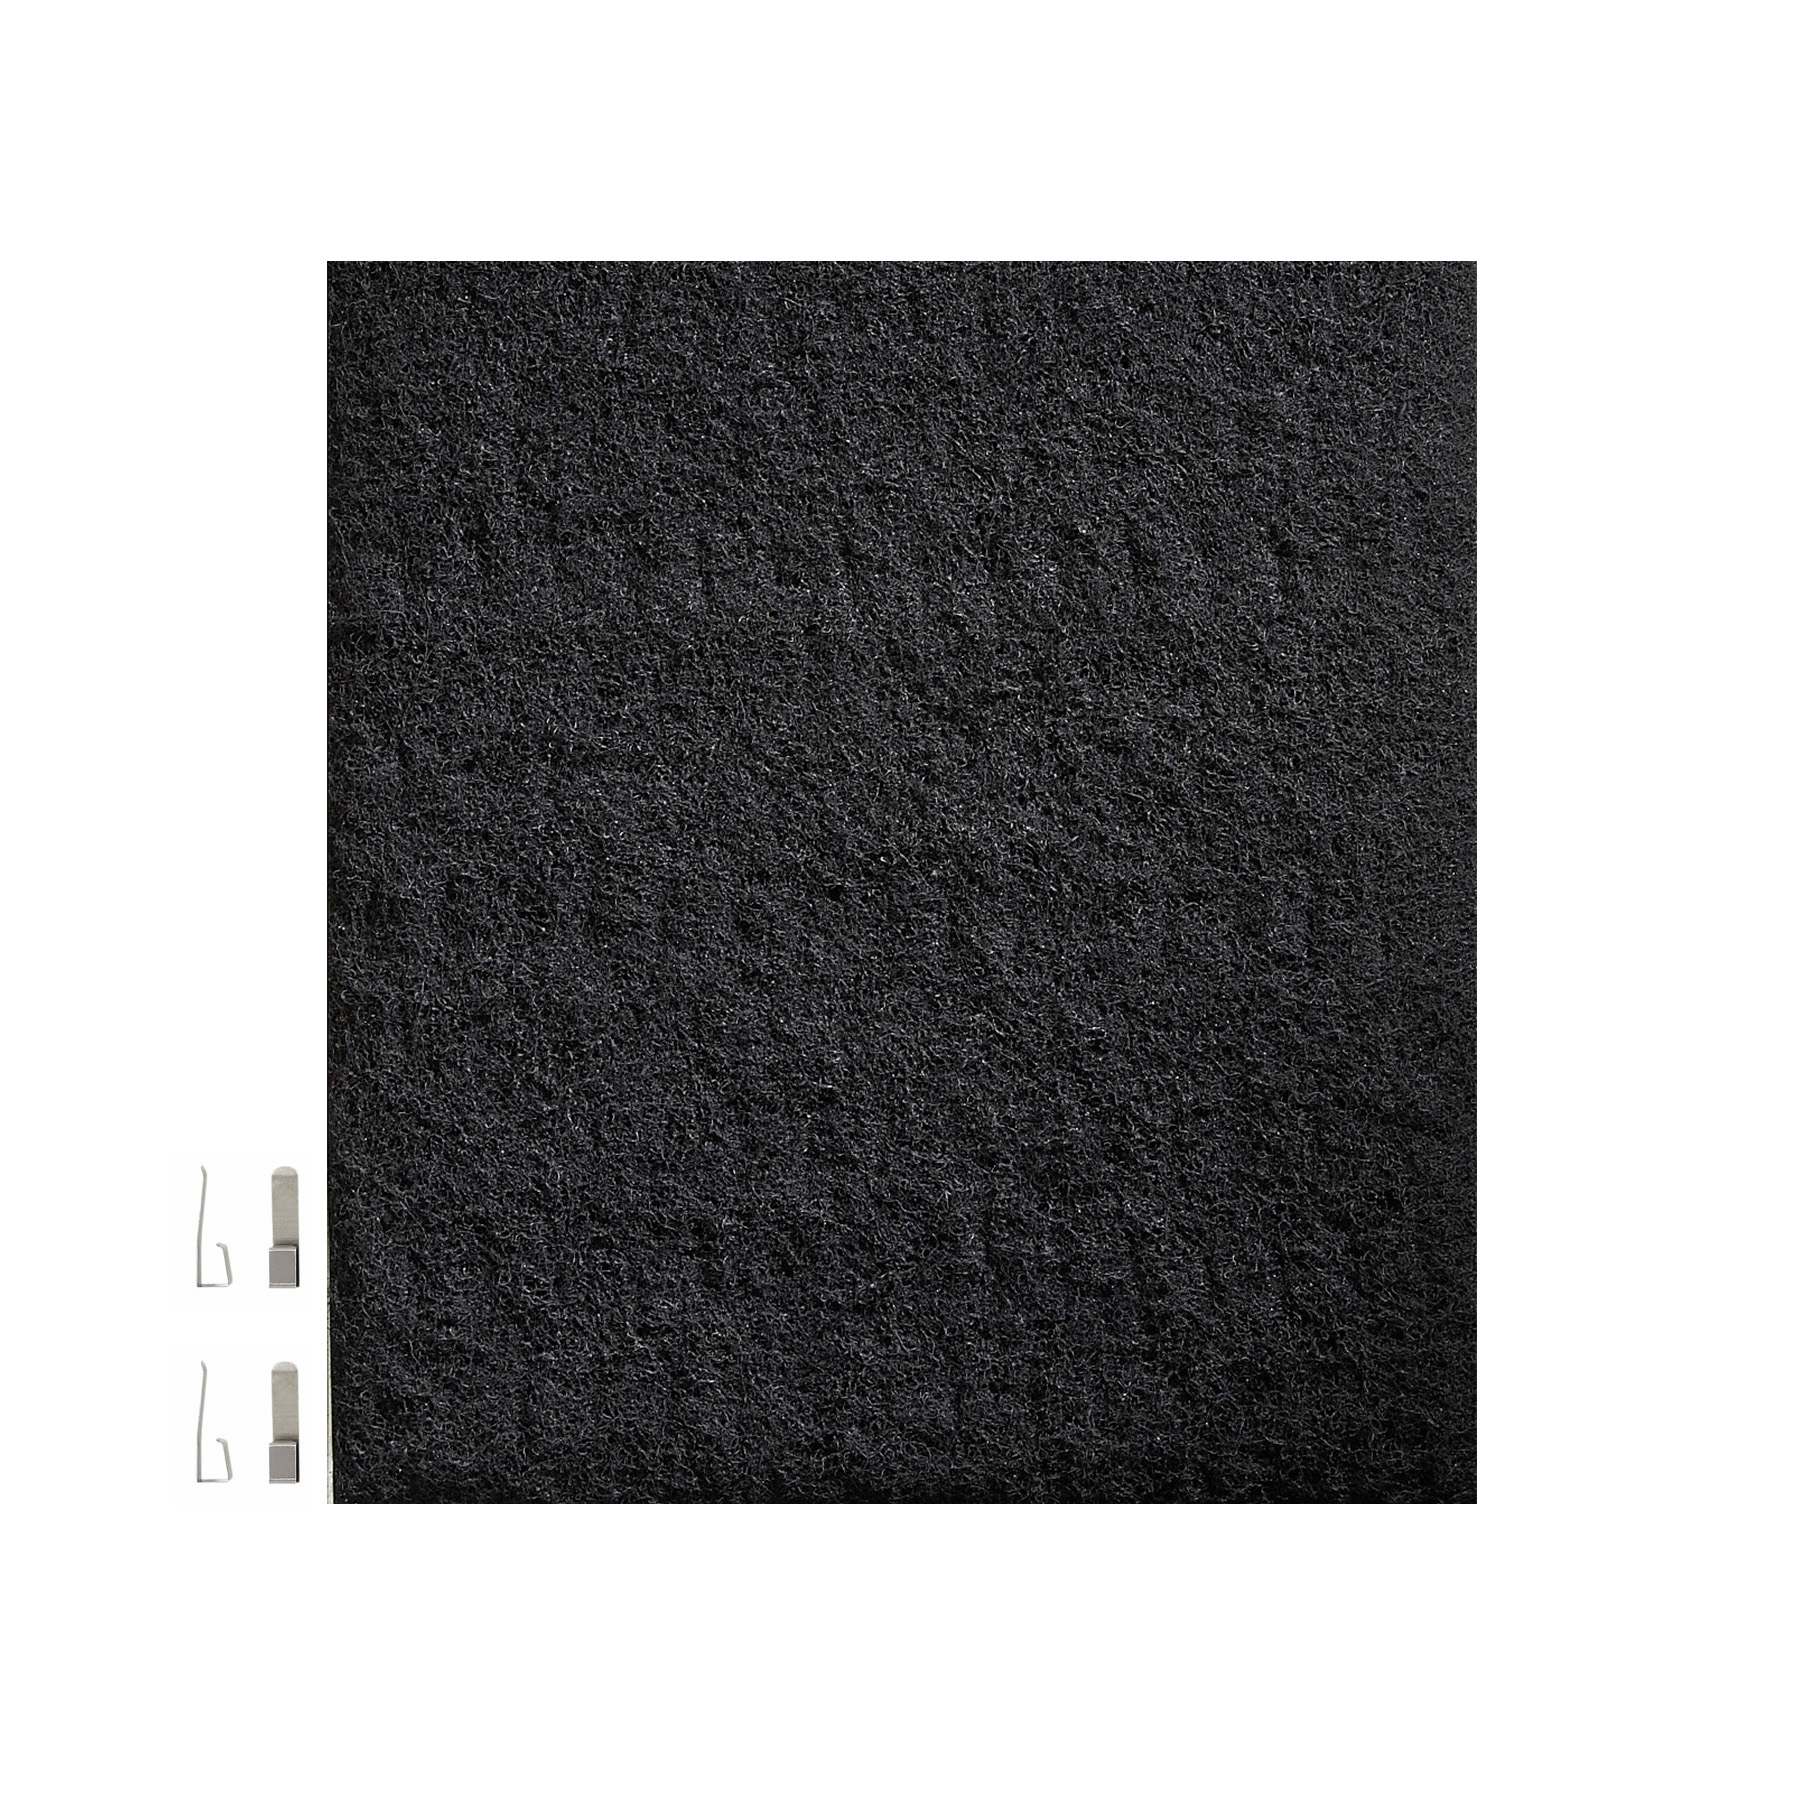 Charcoal Replacement Filter for Broan BXT1 Series Range Hood 10.875" x 10.5" x 0.125"